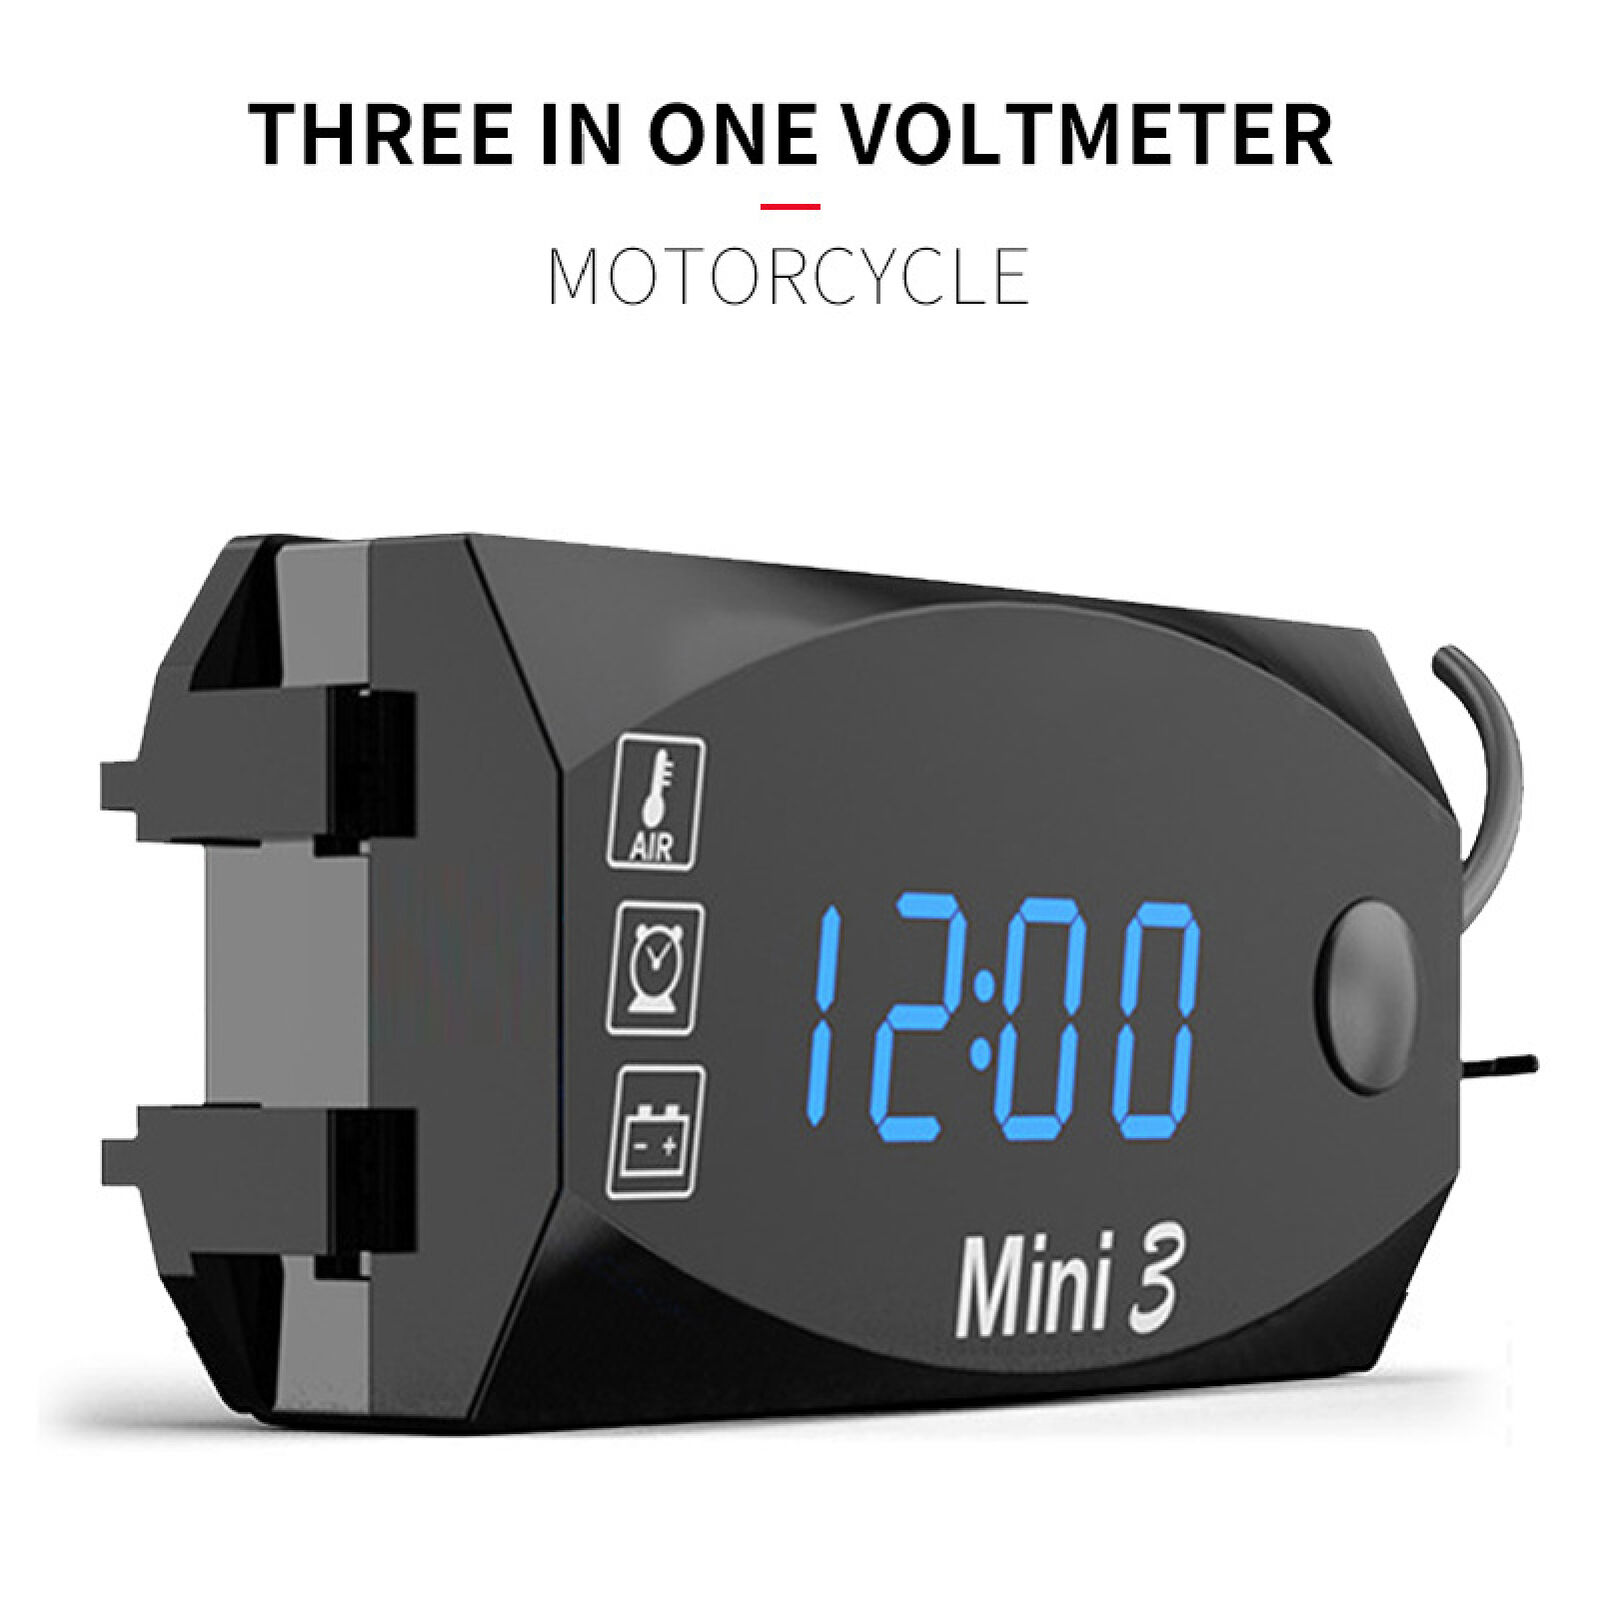 Practical Electronic Clock Thermometer Voltmeter IP67 3 in 1 12V for Motorcycle  Unbranded Does Not Apply - фотография #11